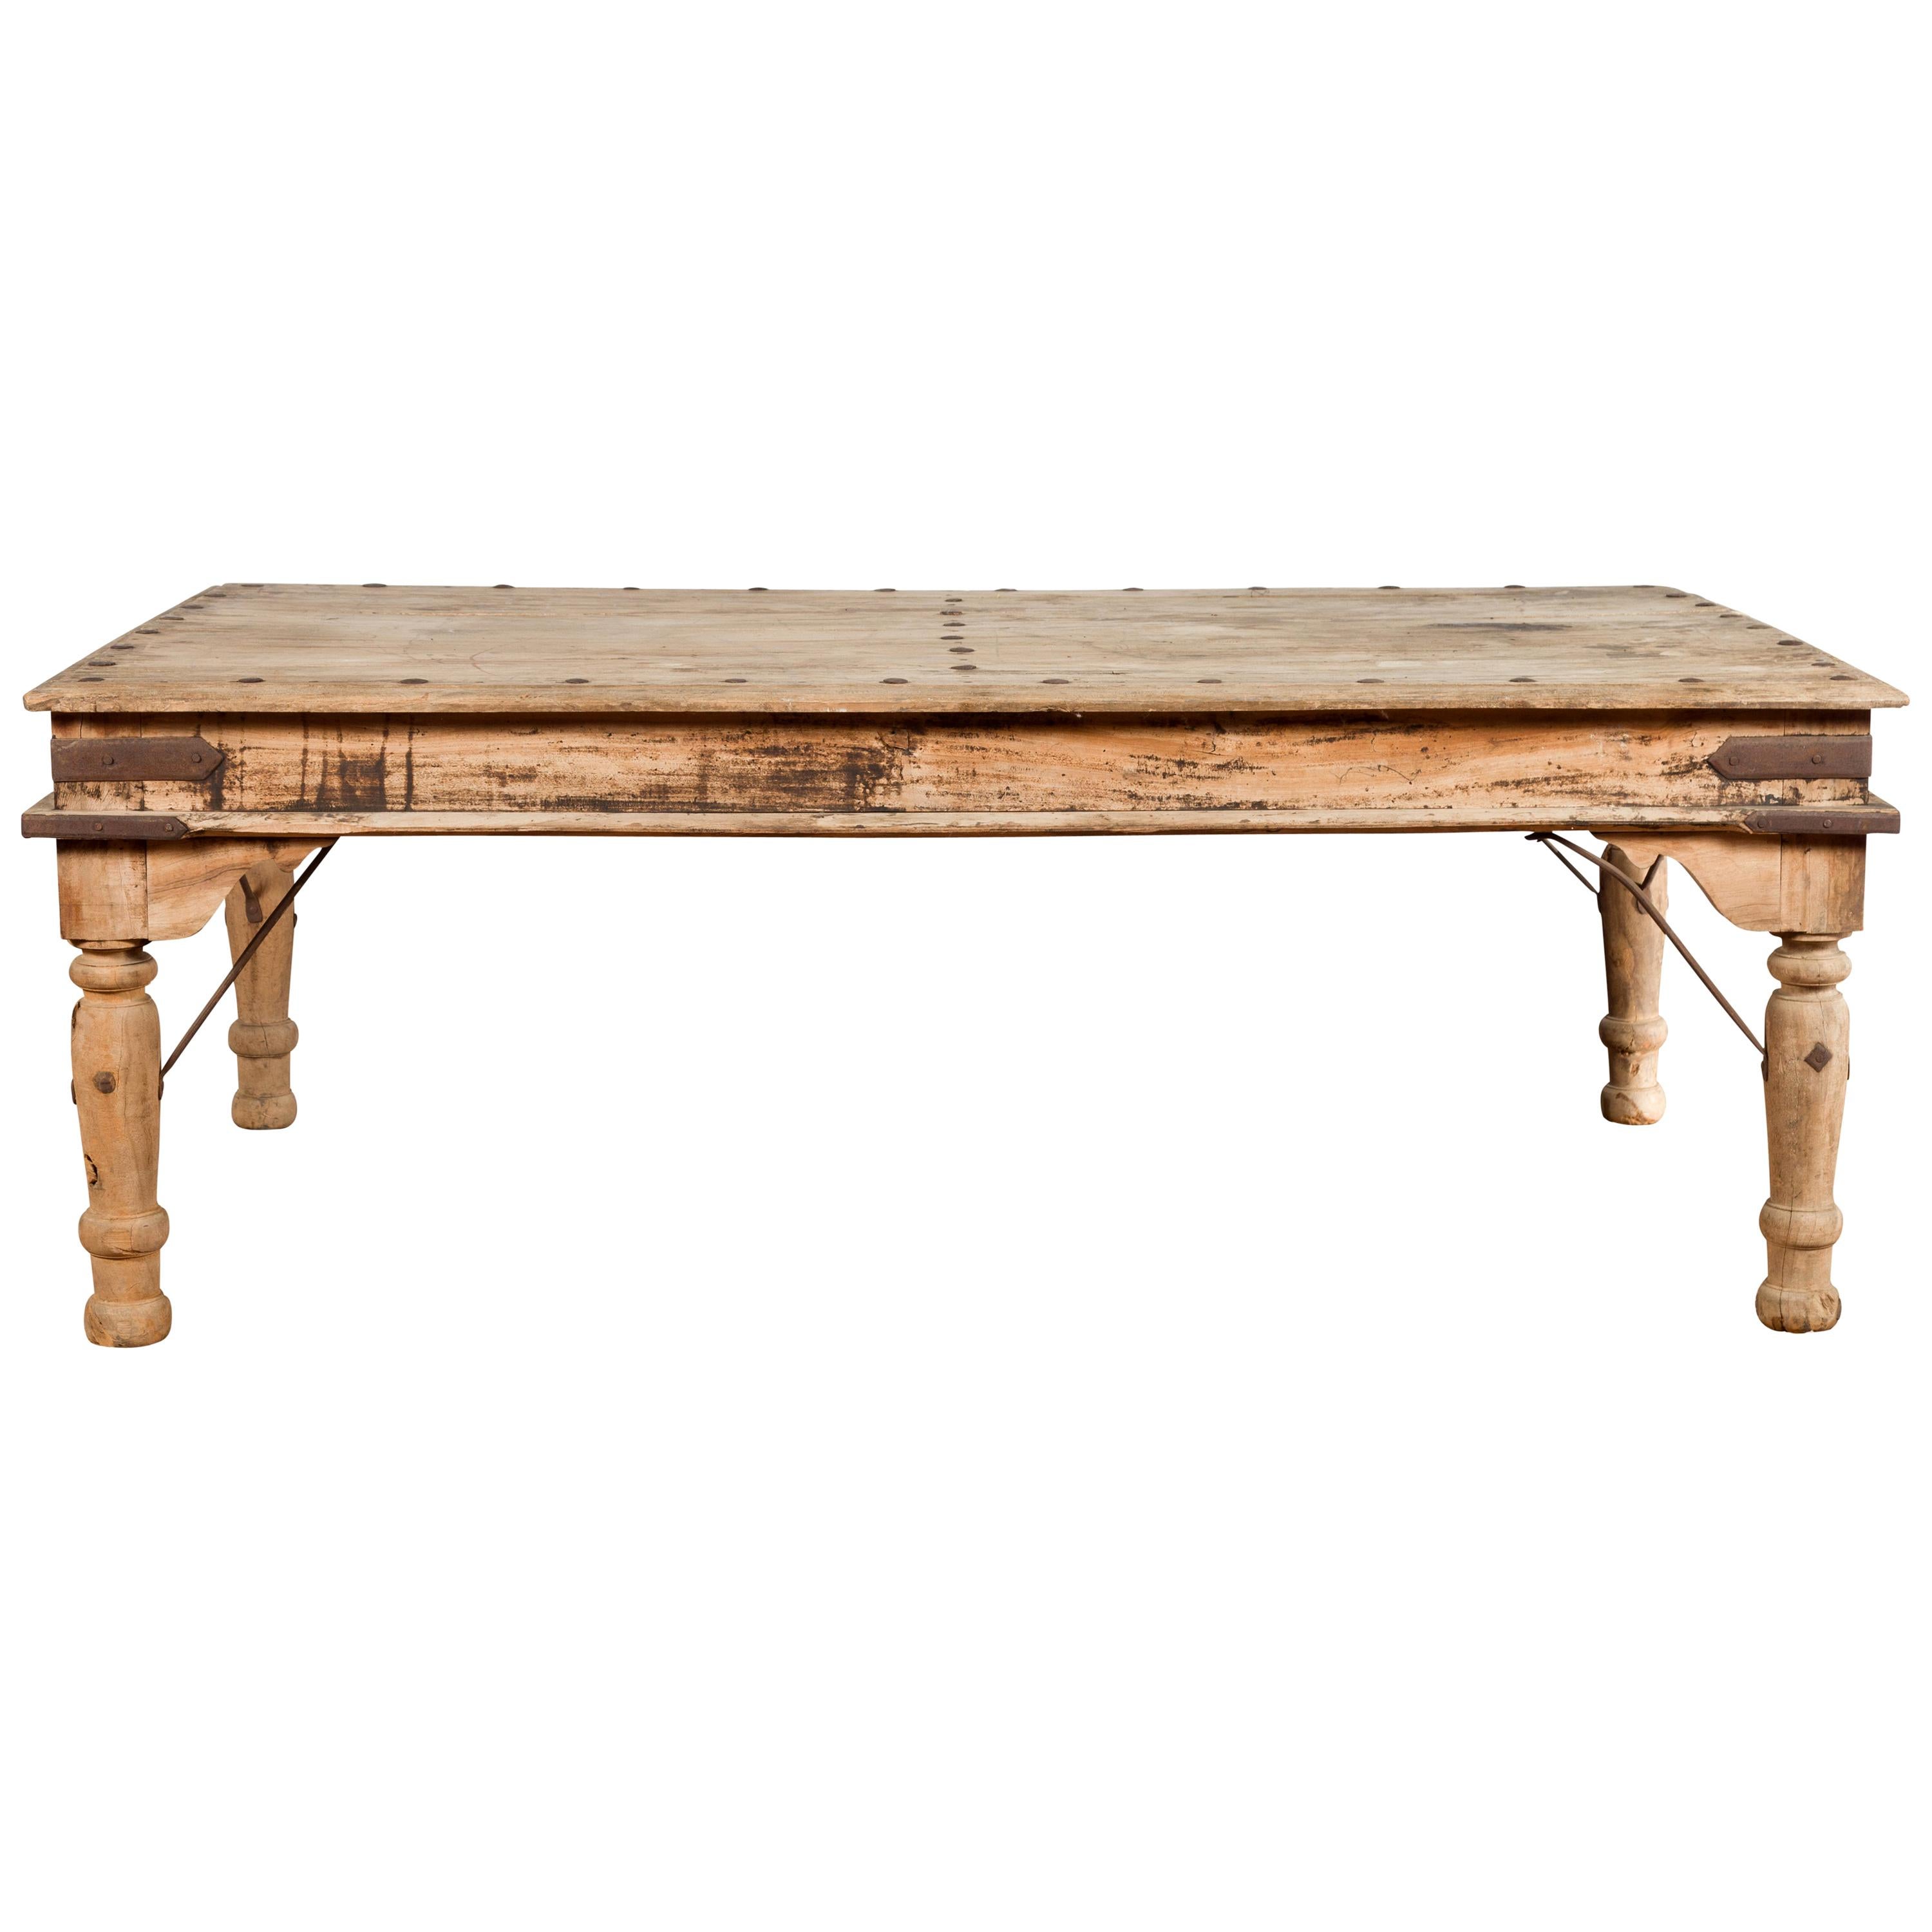 Rustic Indian Low Table with Distressed Patina, Iron Details and Baluster Legs